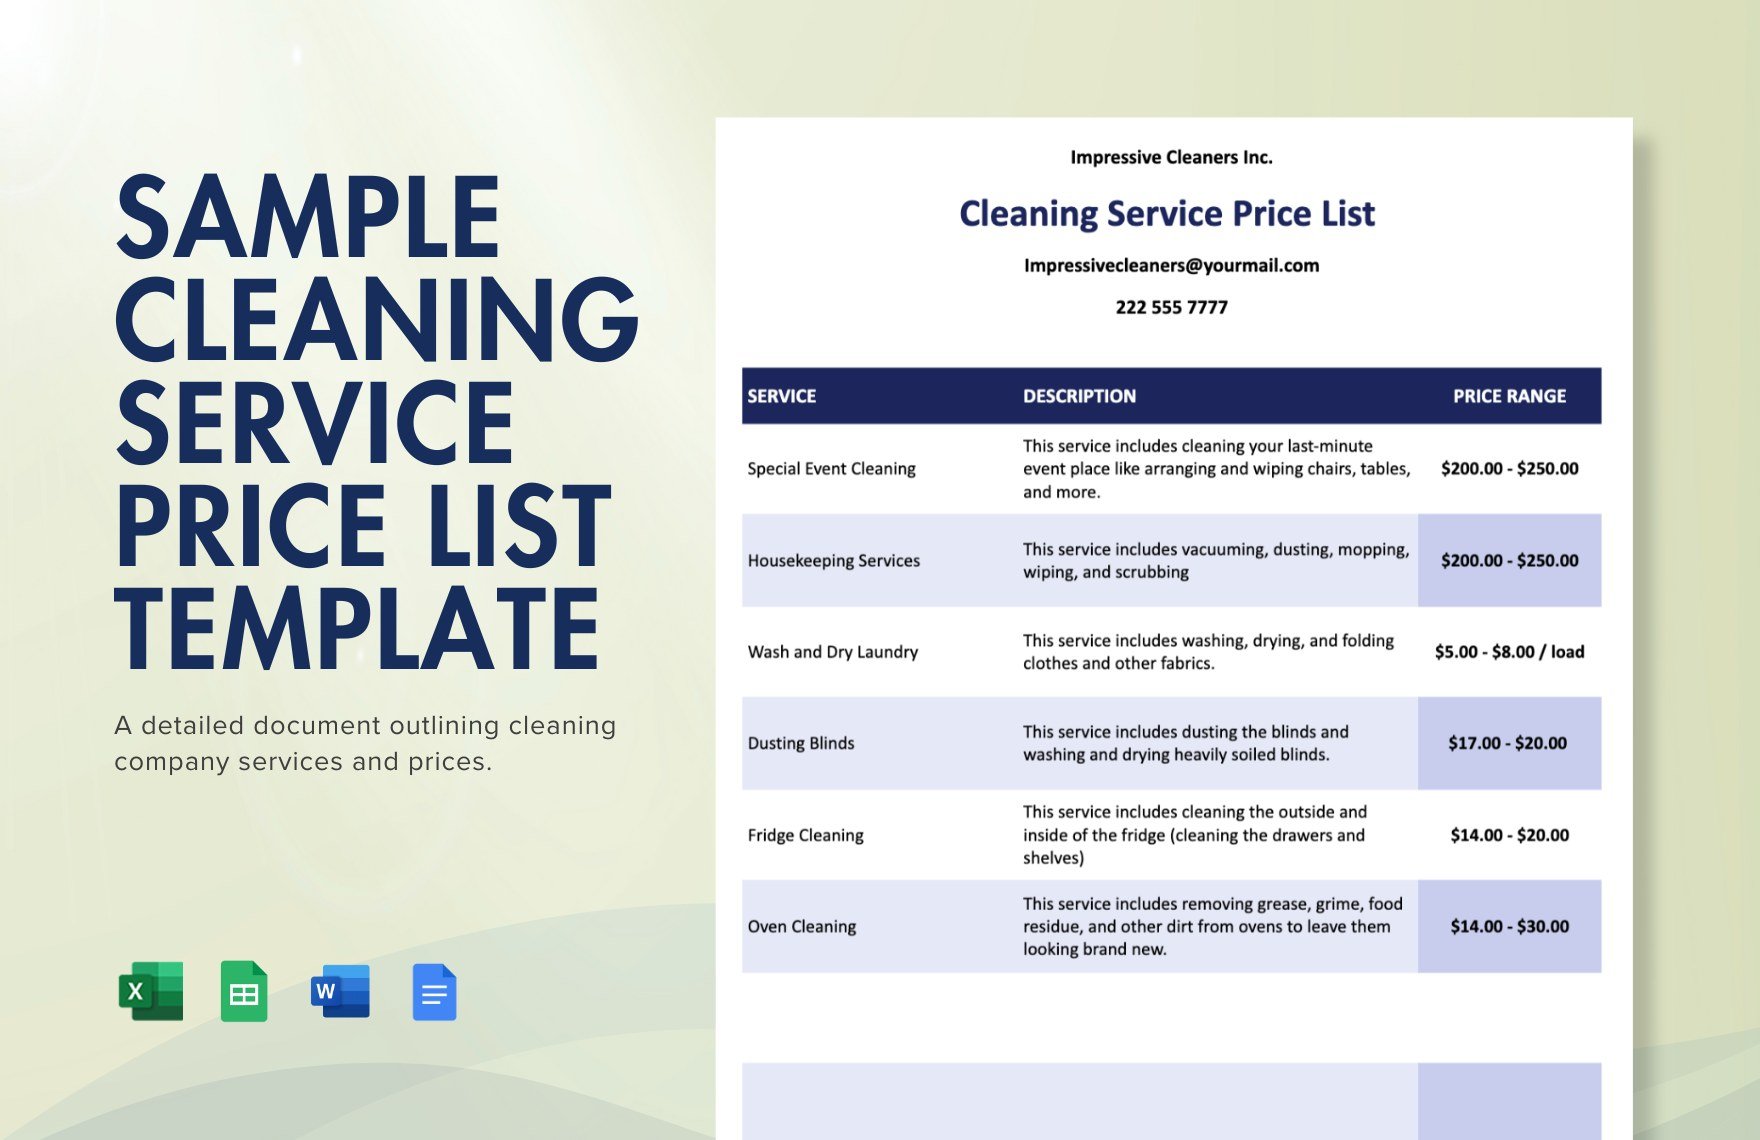 Sample Cleaning Service Price List Template